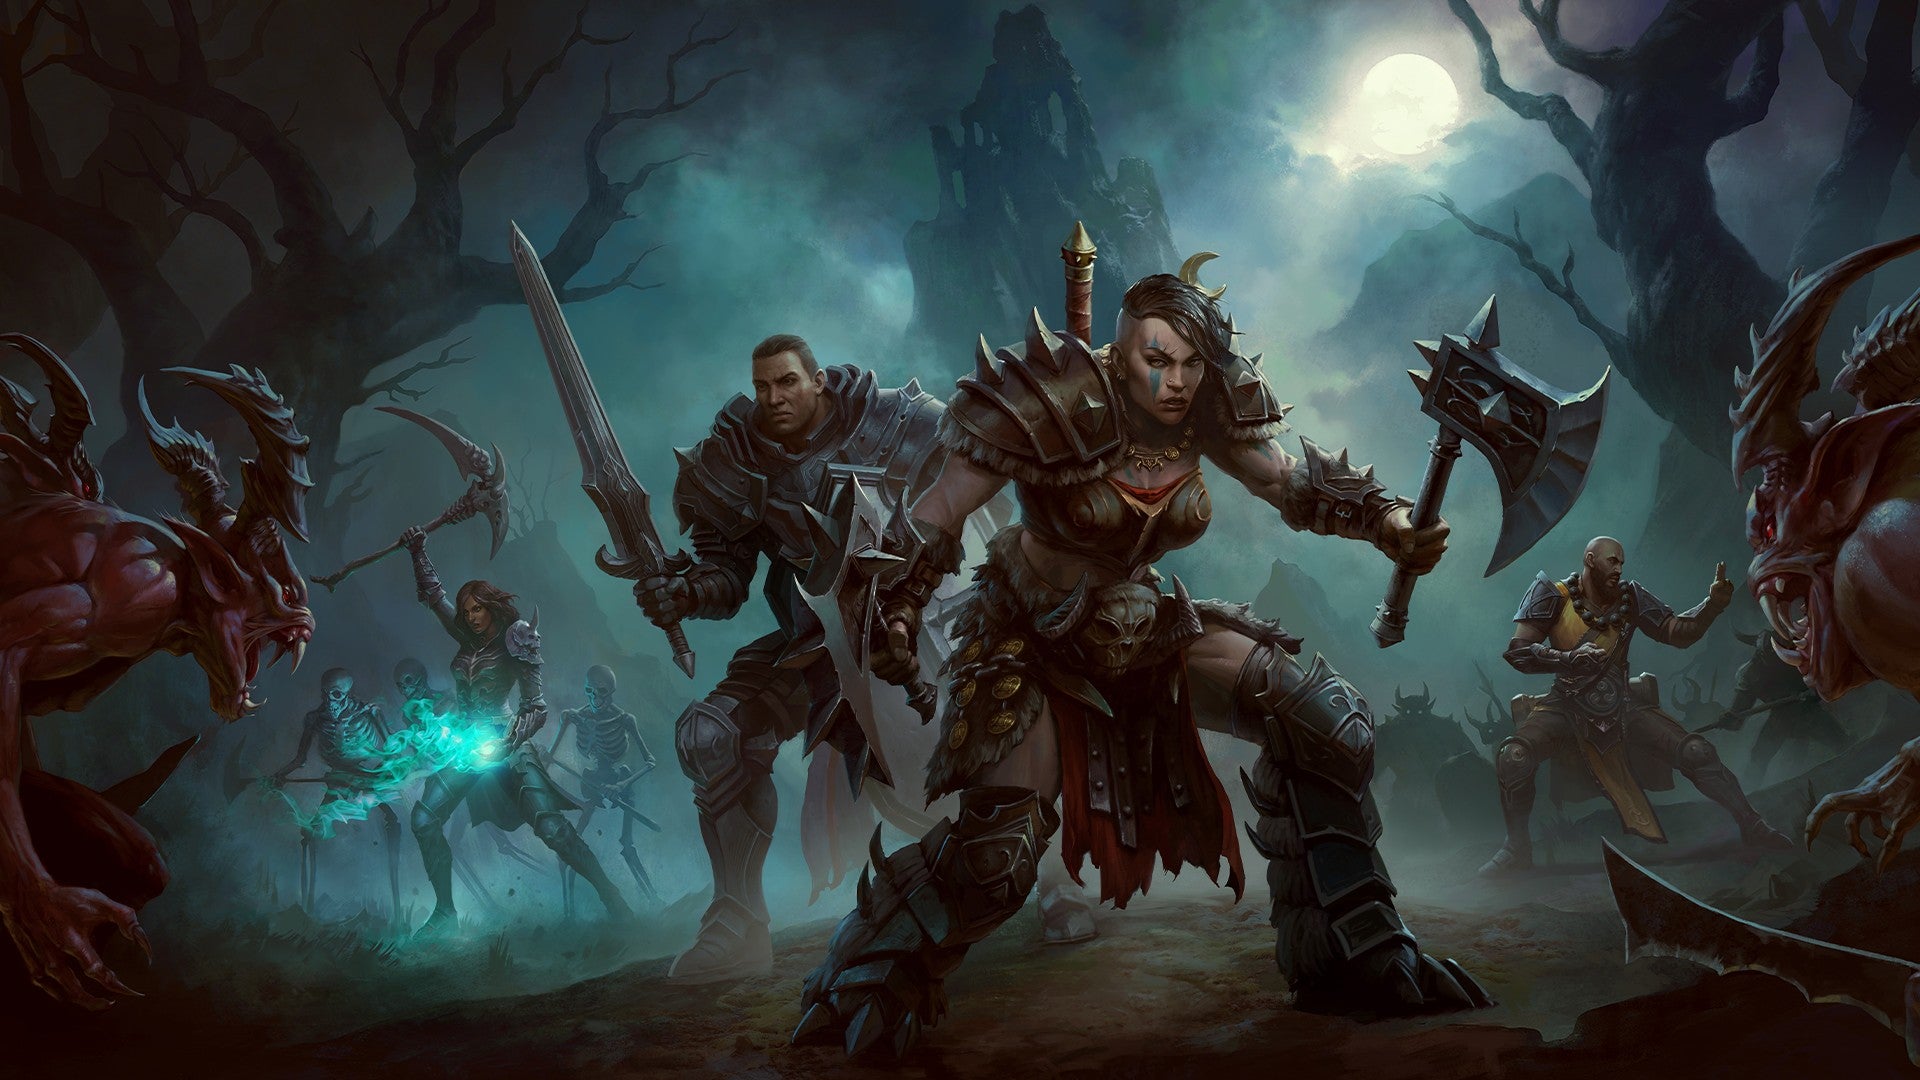 Diablo Immortal is a free-to-play MMO from Blizzard Entertainment.